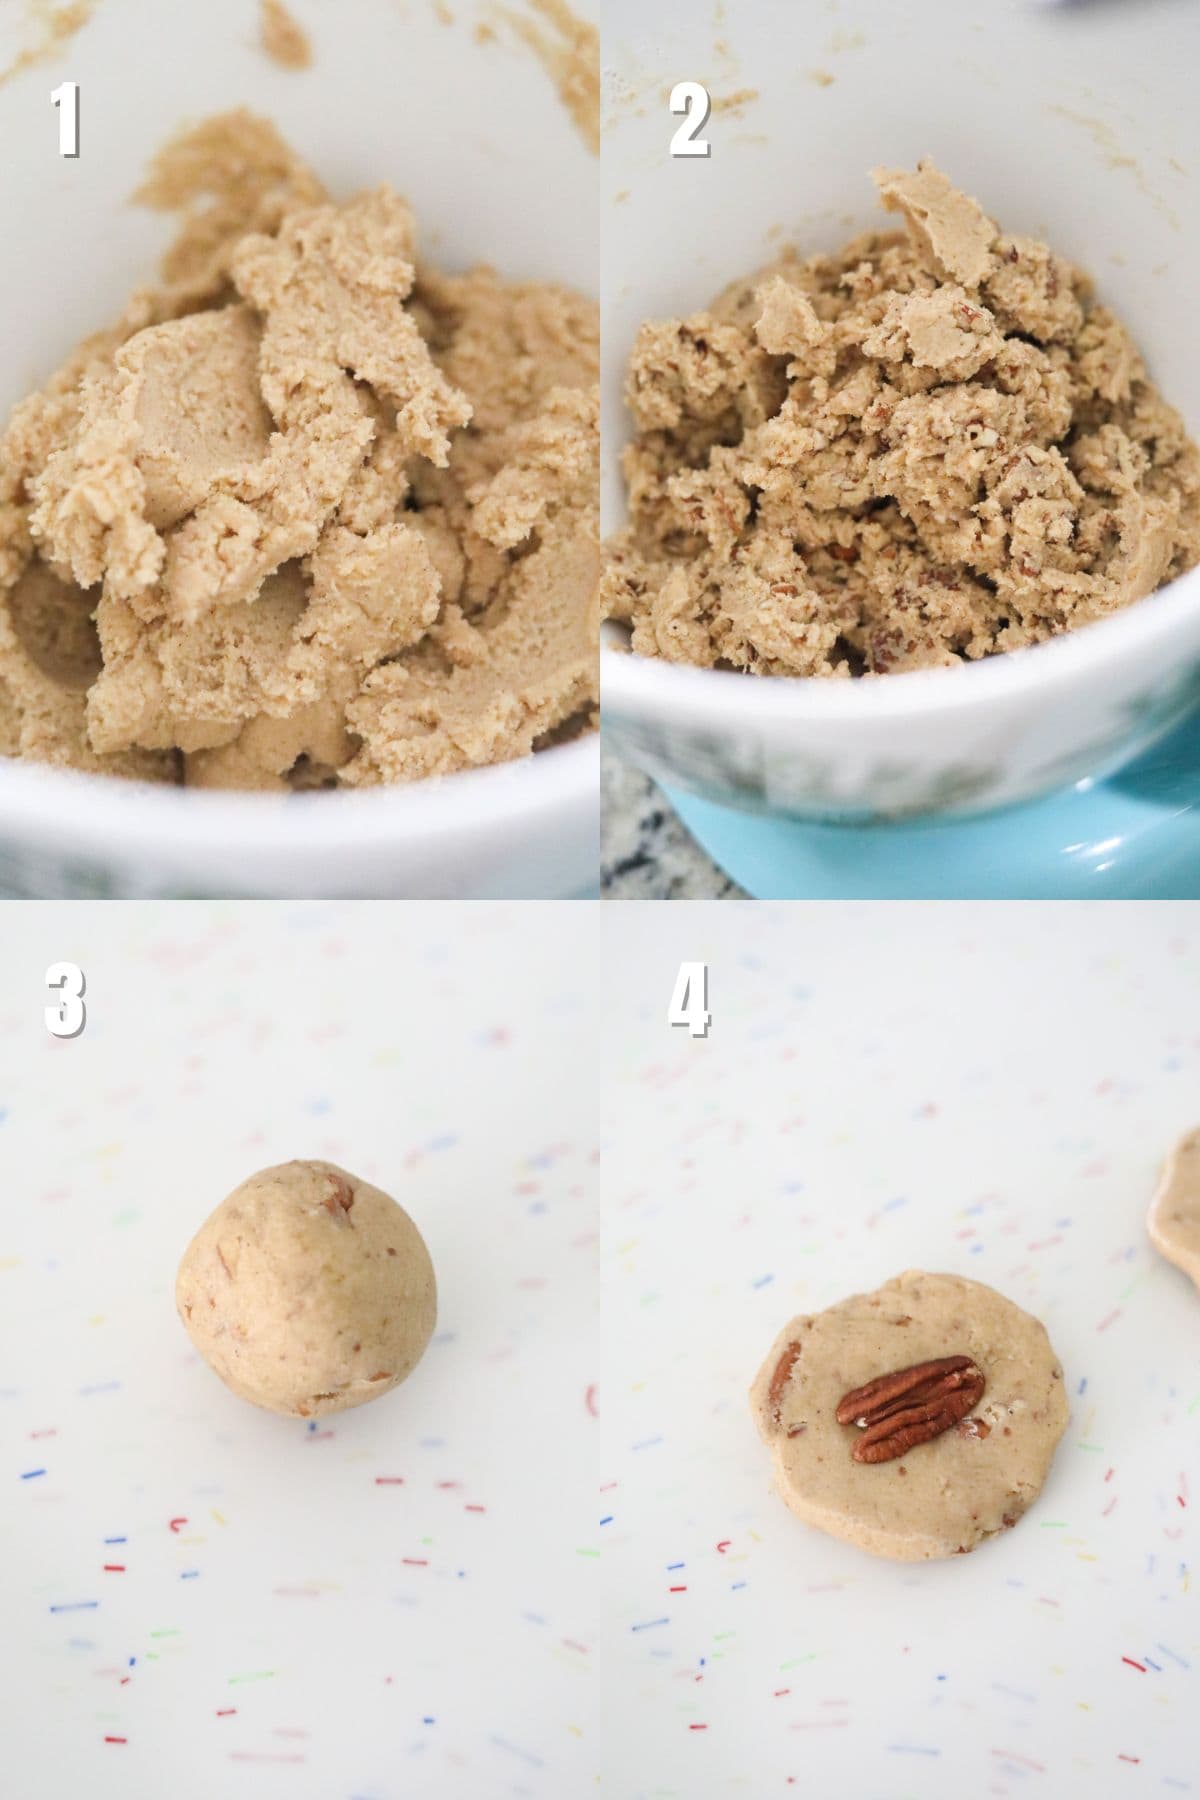 step by step instructions for making pecan sandies.